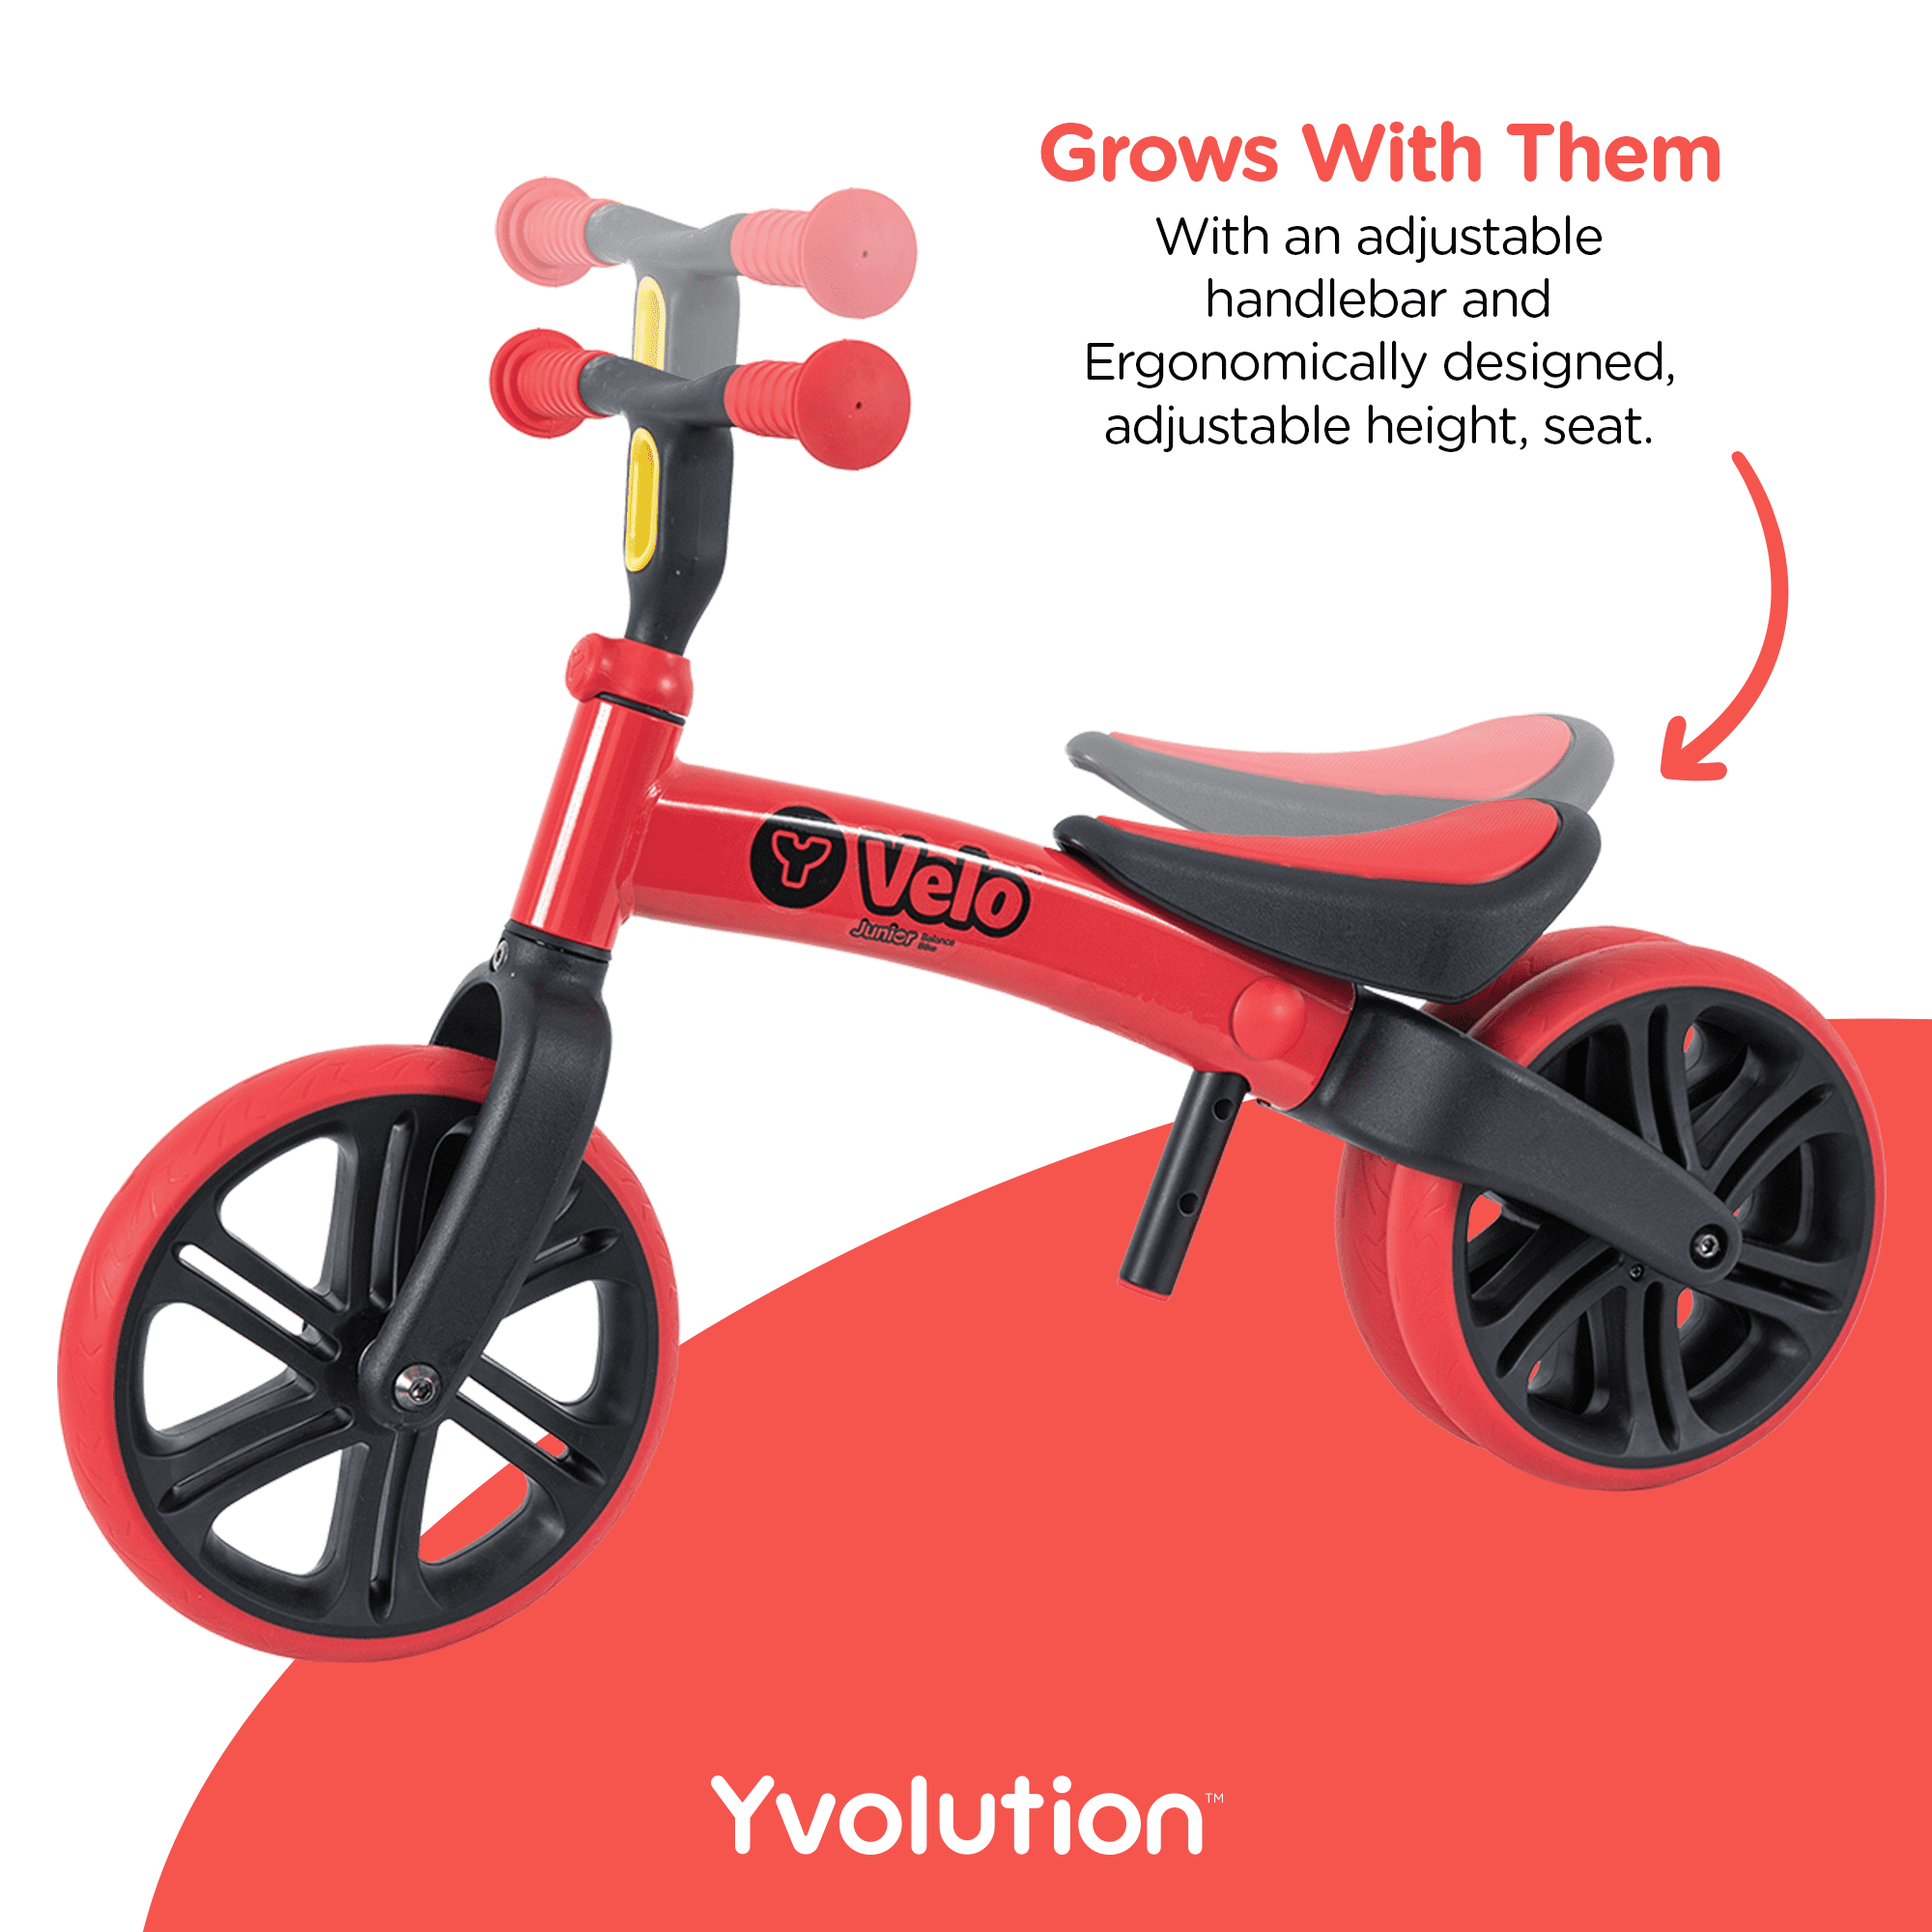 Yvolution Velo Toddler Balance Bike 9'' Wheel (Red) Boys and Girls, 18  Months to 3 Years Old